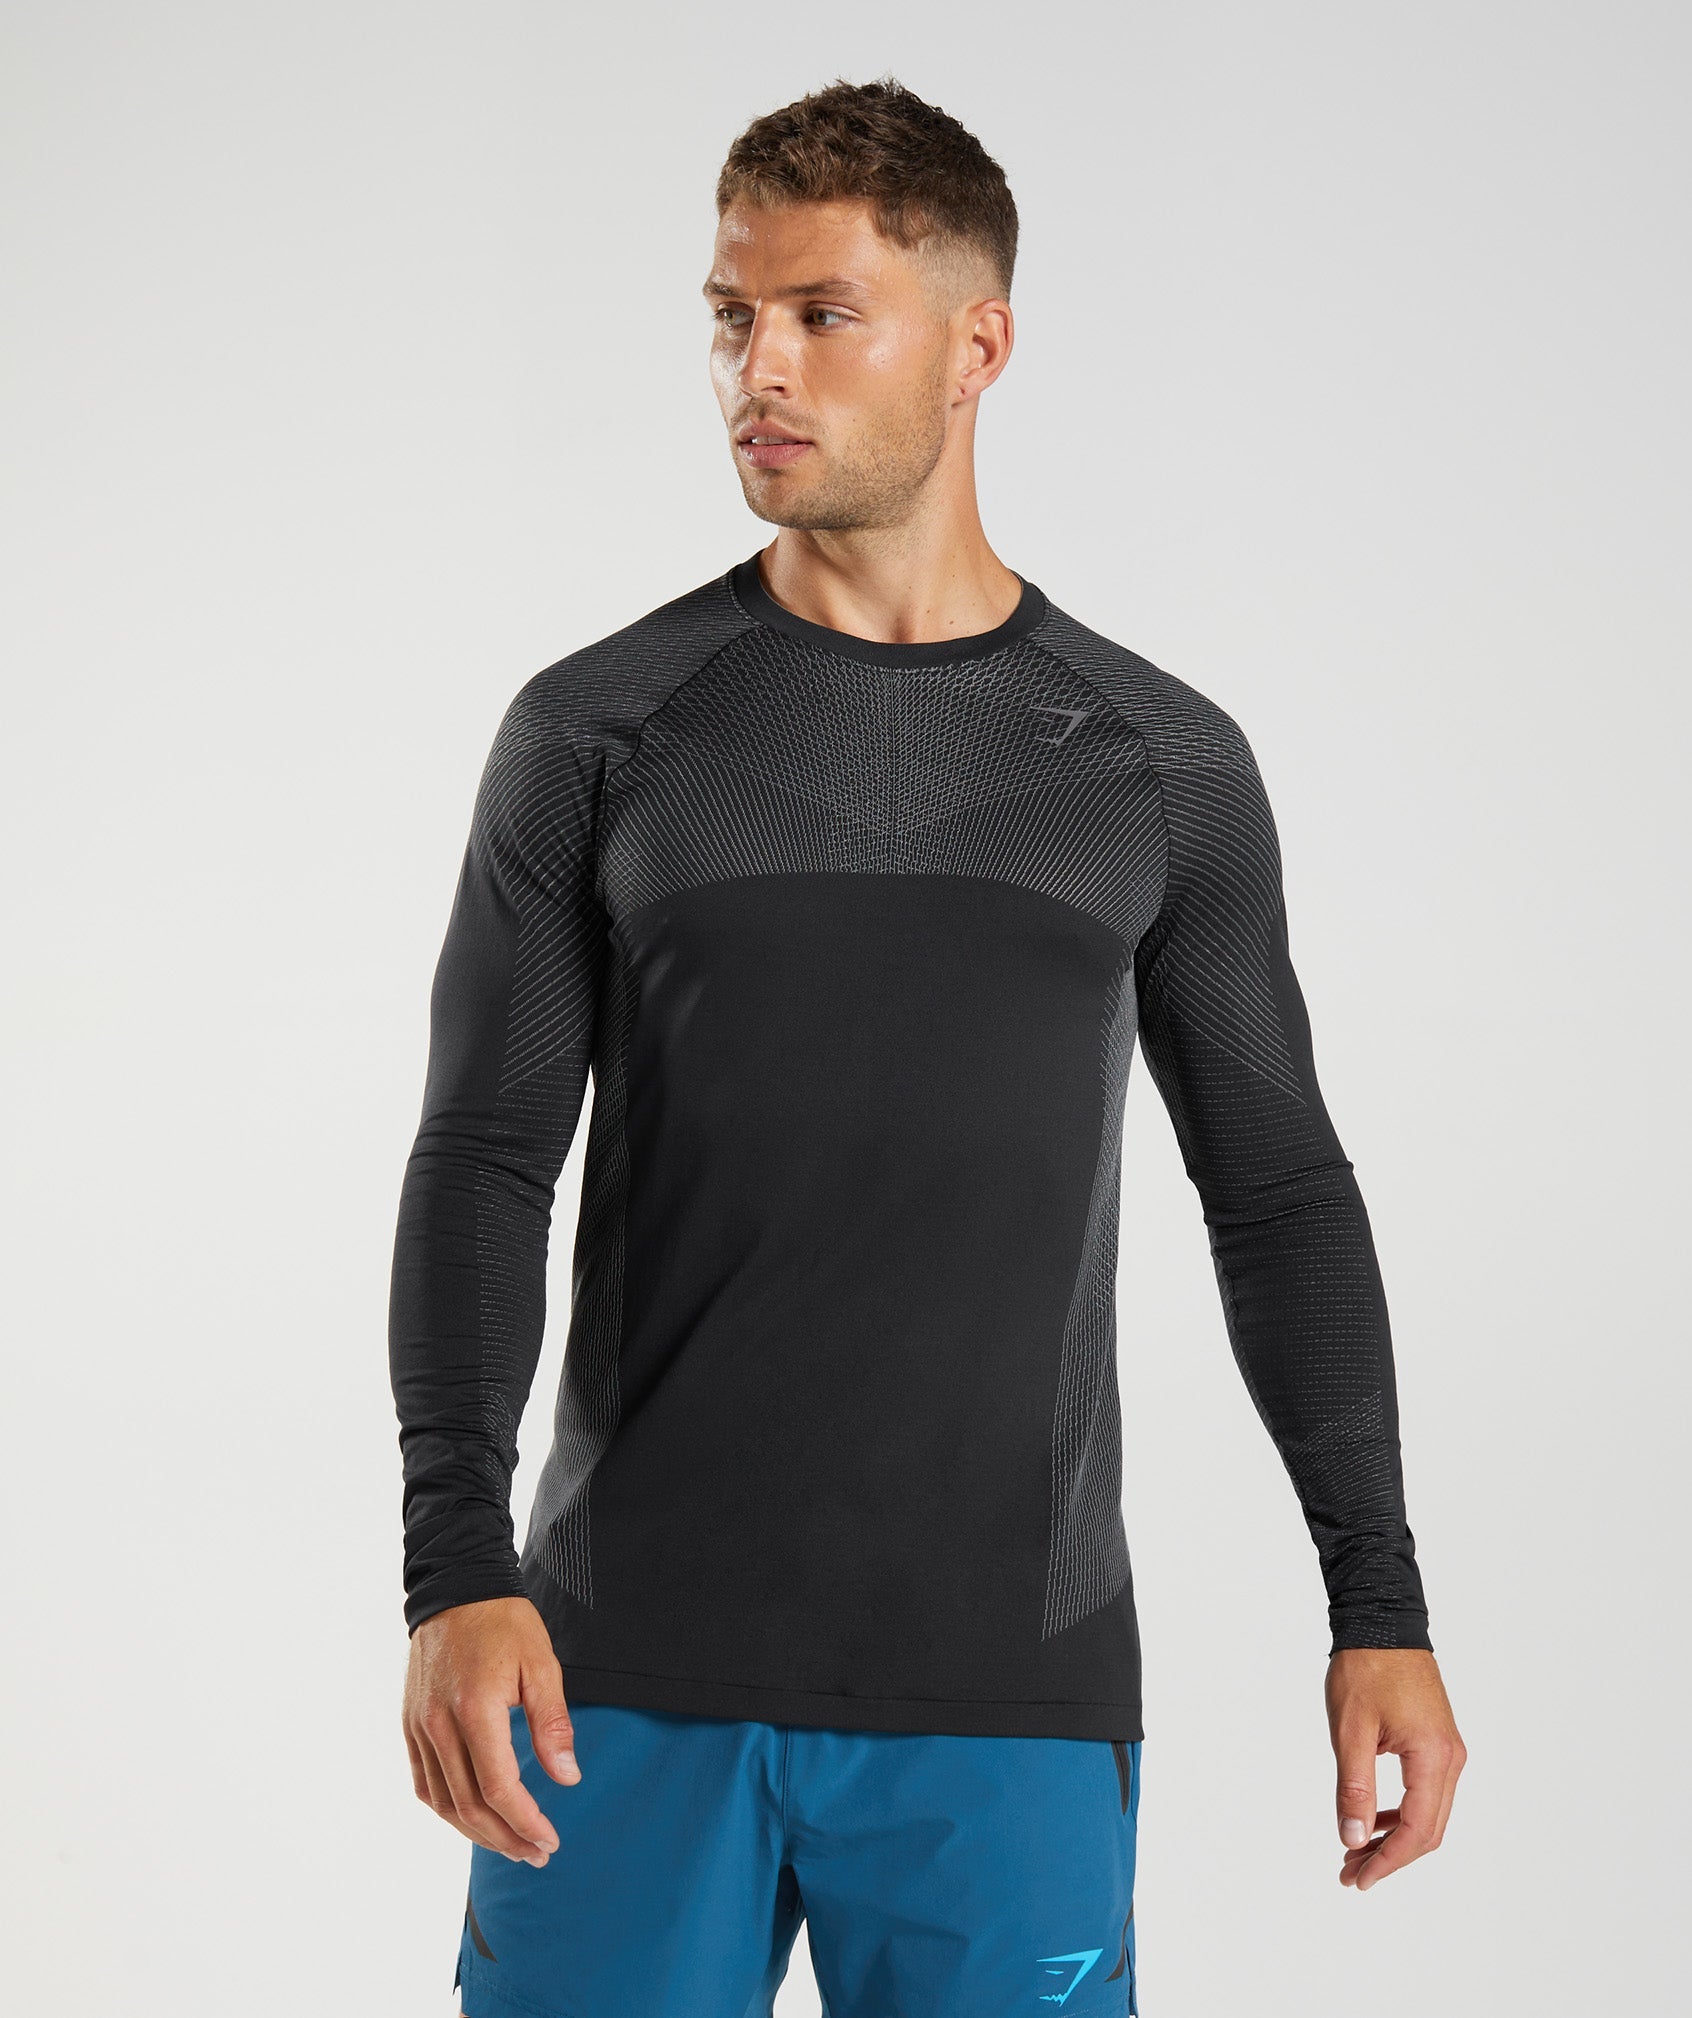 Apex Seamless Long Sleeve T-Shirt in Black/Silhouette Grey